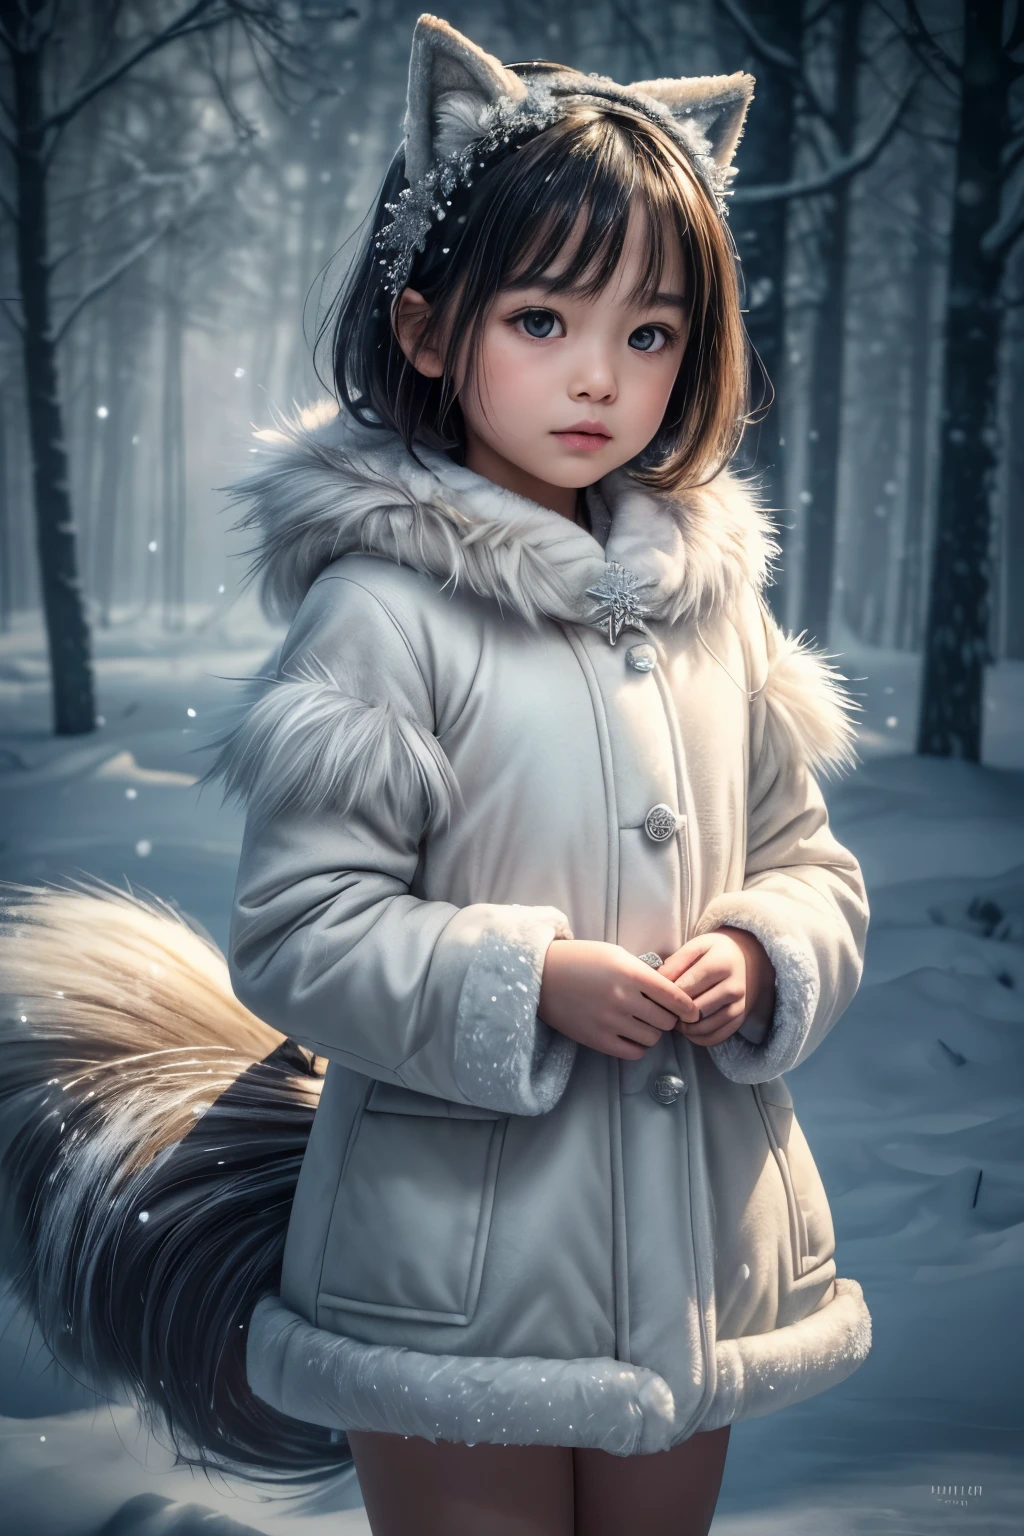 (raw photo:1.2), (photorealistic:1.4), (best quality:1.4), (ultra highres:1.2), (high detail:1.3), (HDR:1.2), (cinematic lighting:1.3), (little girl ), (4 years old), (asian girl), (shoulder length hair), (short hair), eye detail ), (detailed facial features), (fur detail), (snowy background:1.2), cute little fox, standing pose, ( 3/4 body portrait:1.2), (fluffy tail:1.2), (soft fur:1.2) , (adorable:1.2), (looking at the viewer), (innocent expression), (soft lighting), (dreamlike), ( fantasylike:1.3), (ethereal:1.3), (magic:1.2), (dream forest), (snowflake:1.2), (winter wonderland:1.3), (strange:1.2), (playful: 1.2).